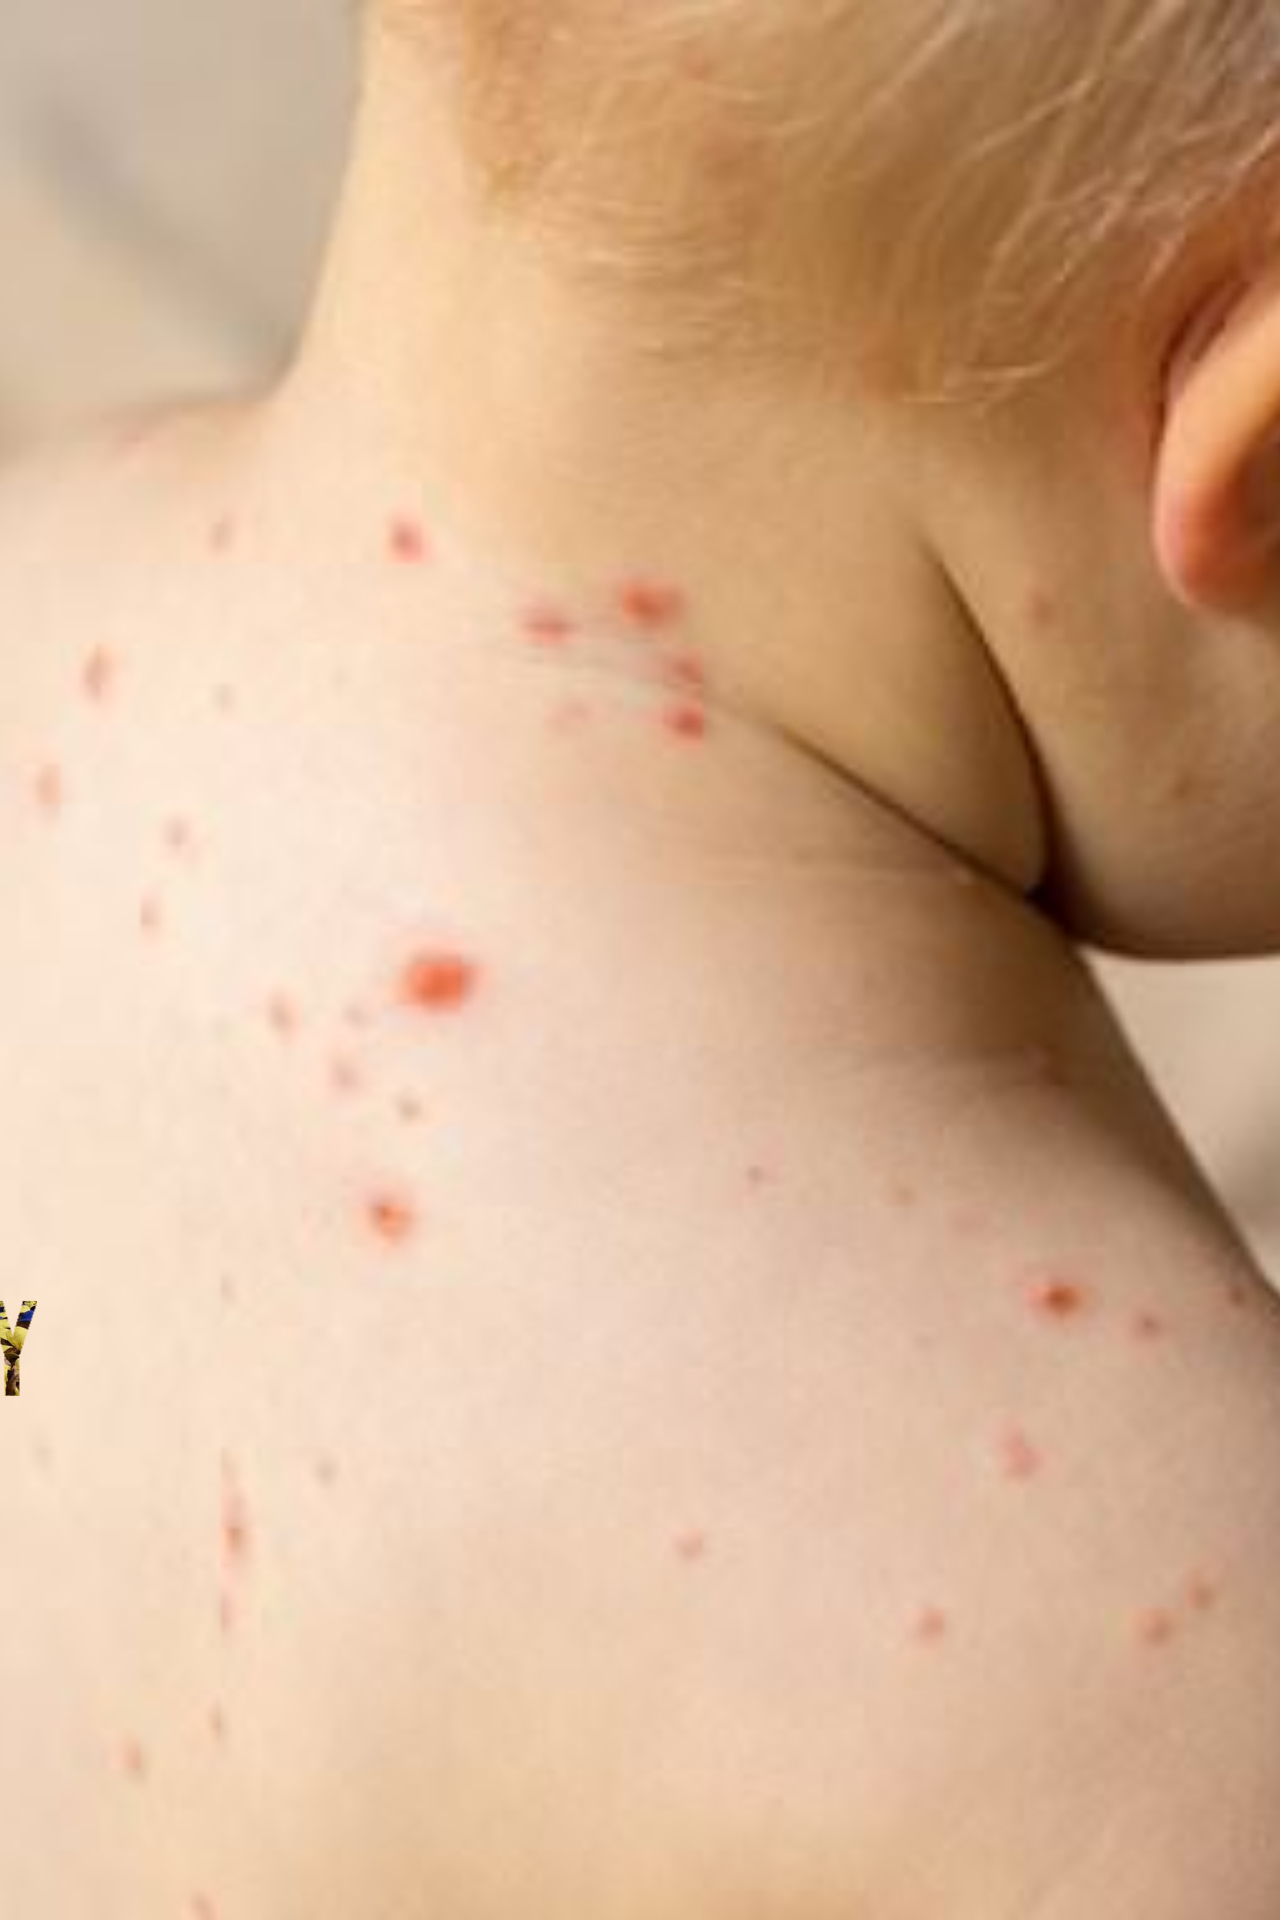 The infection causing red round blisters on the skin of children below the age of five is called Tomato flu. 